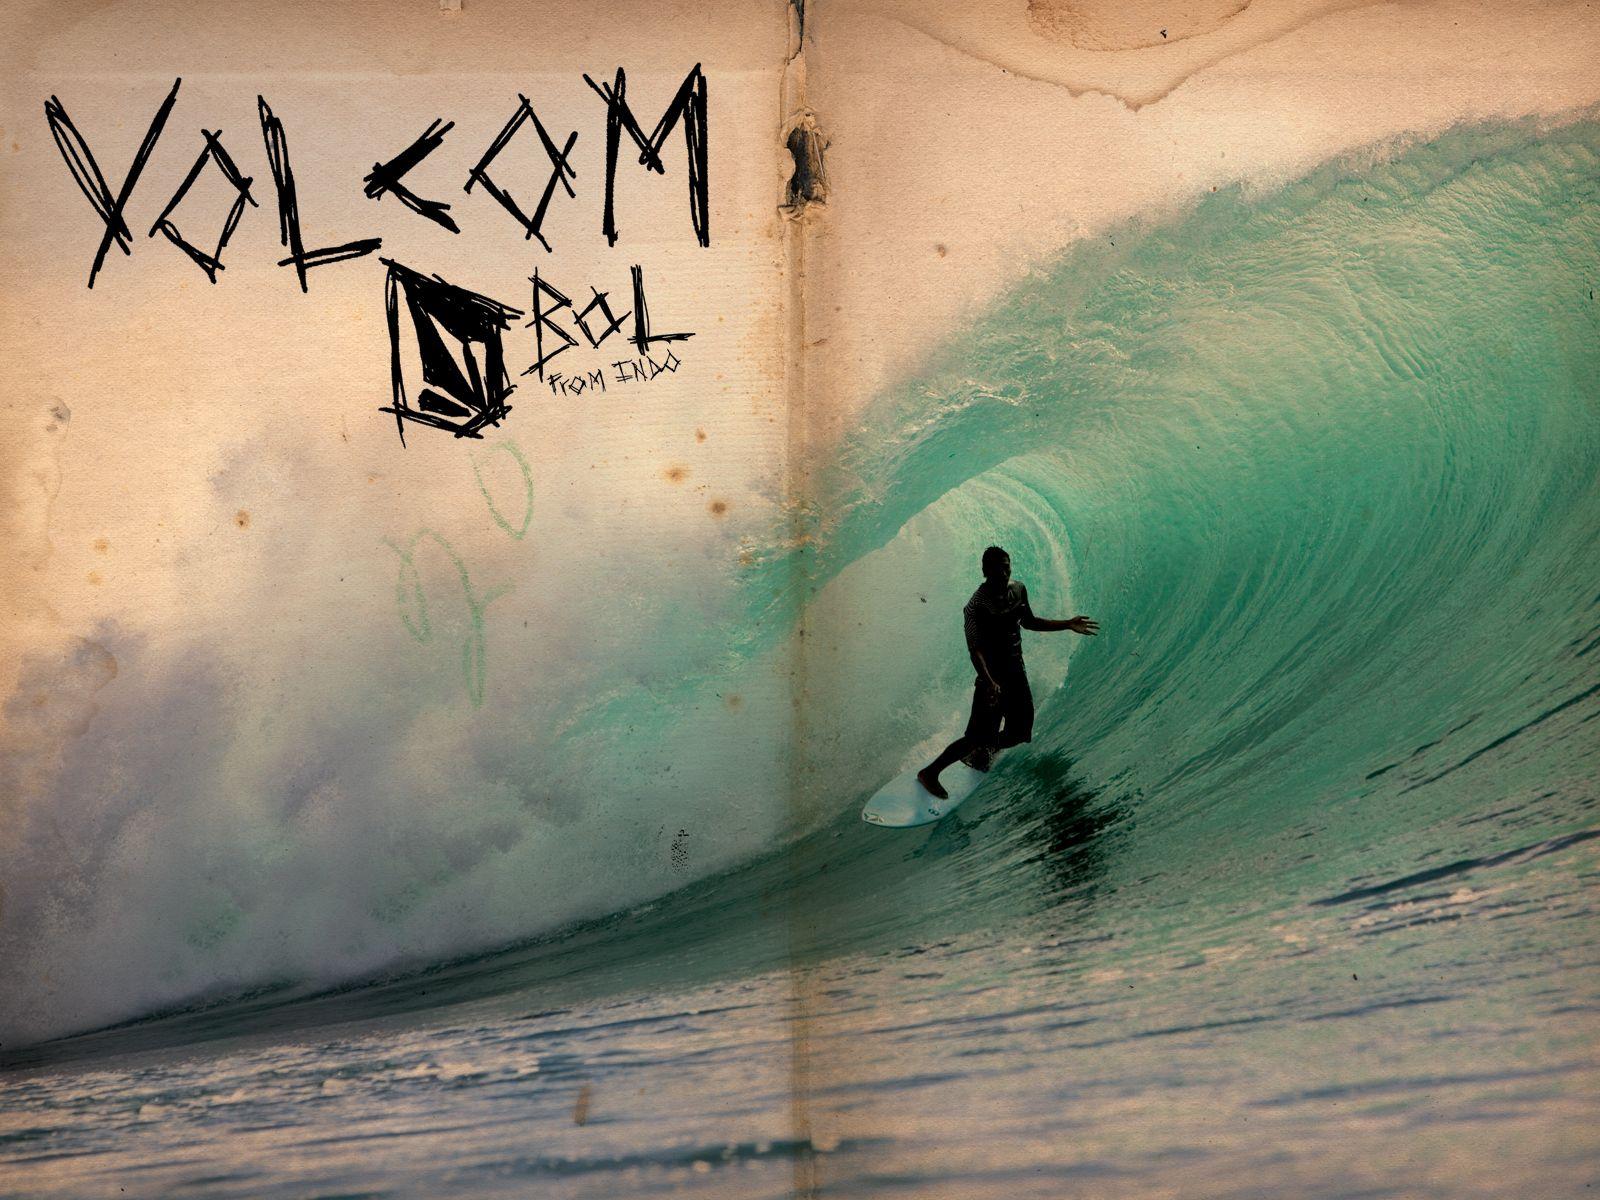 Volcom Bol from Indo Wallpaper and Background Imagex1200